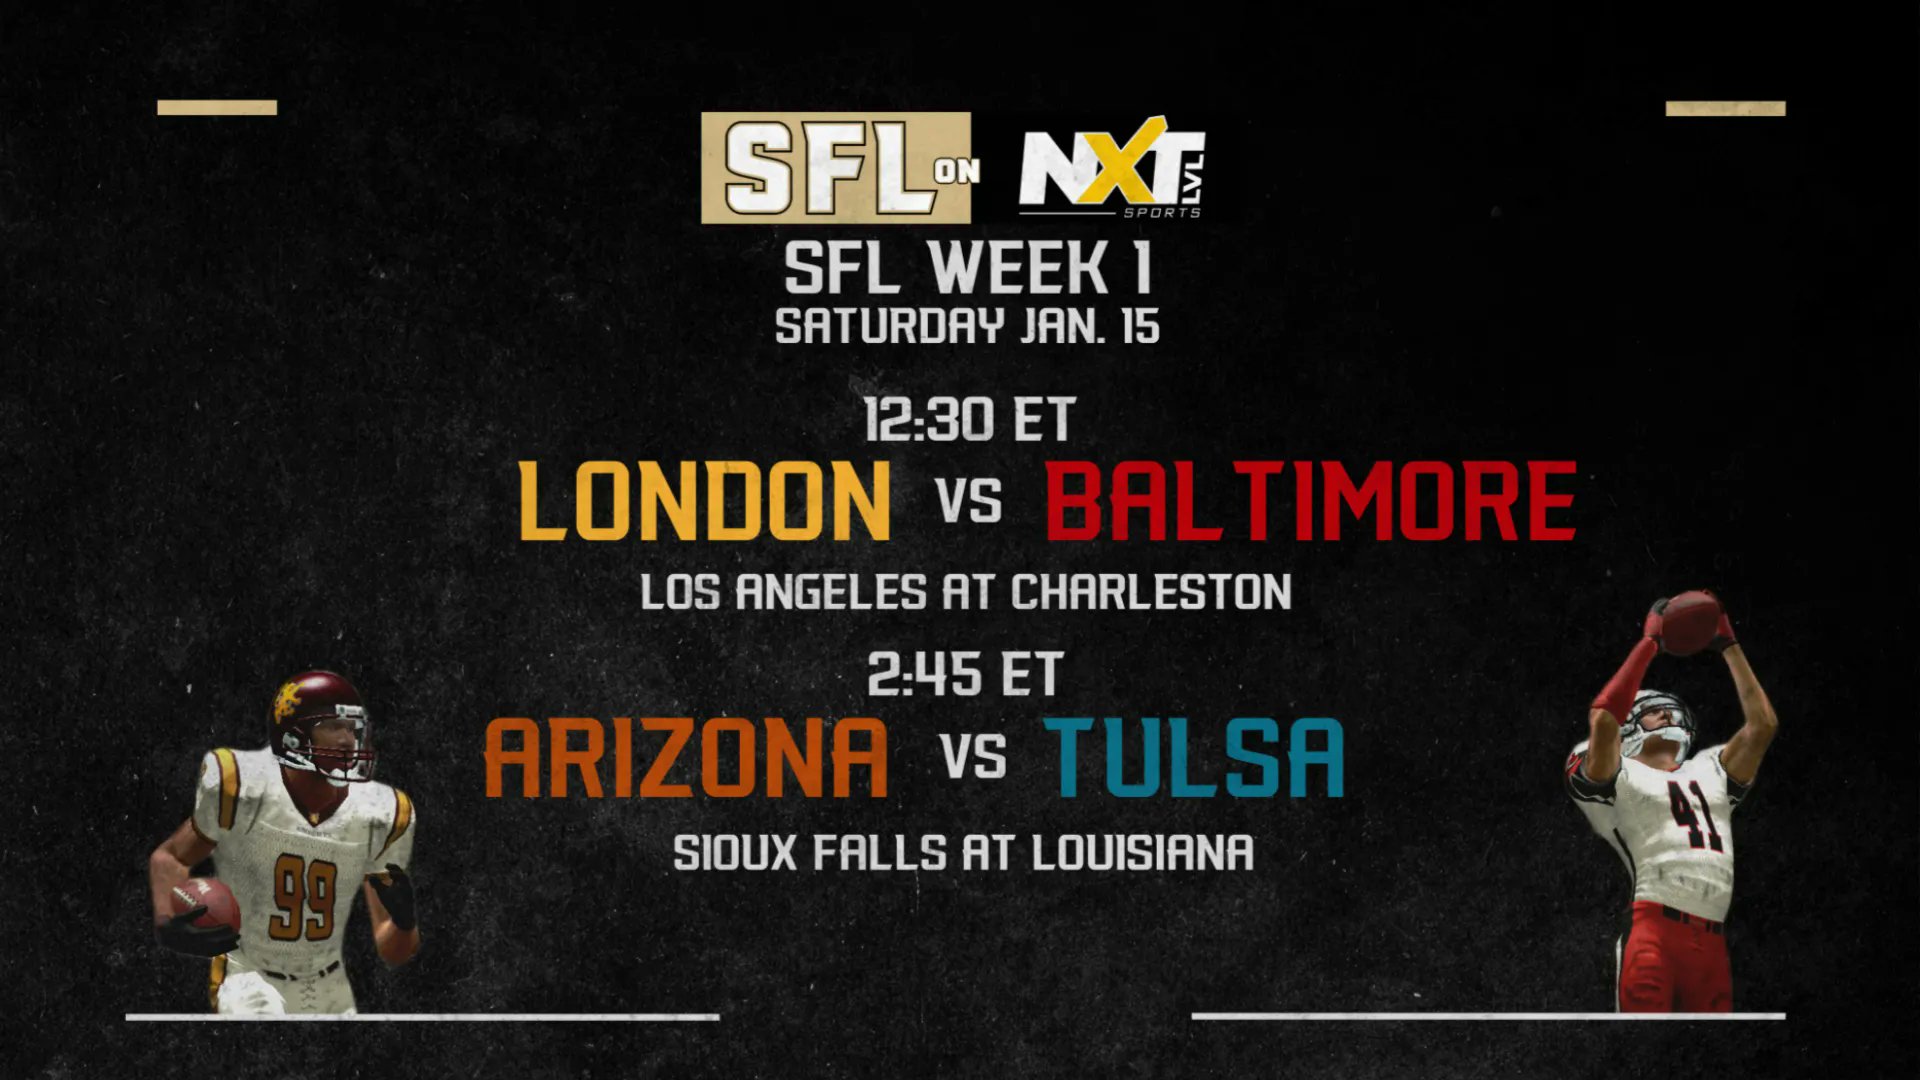 Iowa State Finals Schedule Fall 2022 Simulation Football League On Twitter: "Kickoff Weekend Is On National Tv  For The 5Th-Straight Season With @Sfllondon And @Sfl_Vultures - It Hits  Different Though With The Growing @Itsnxtlevel Team, We're Ready To